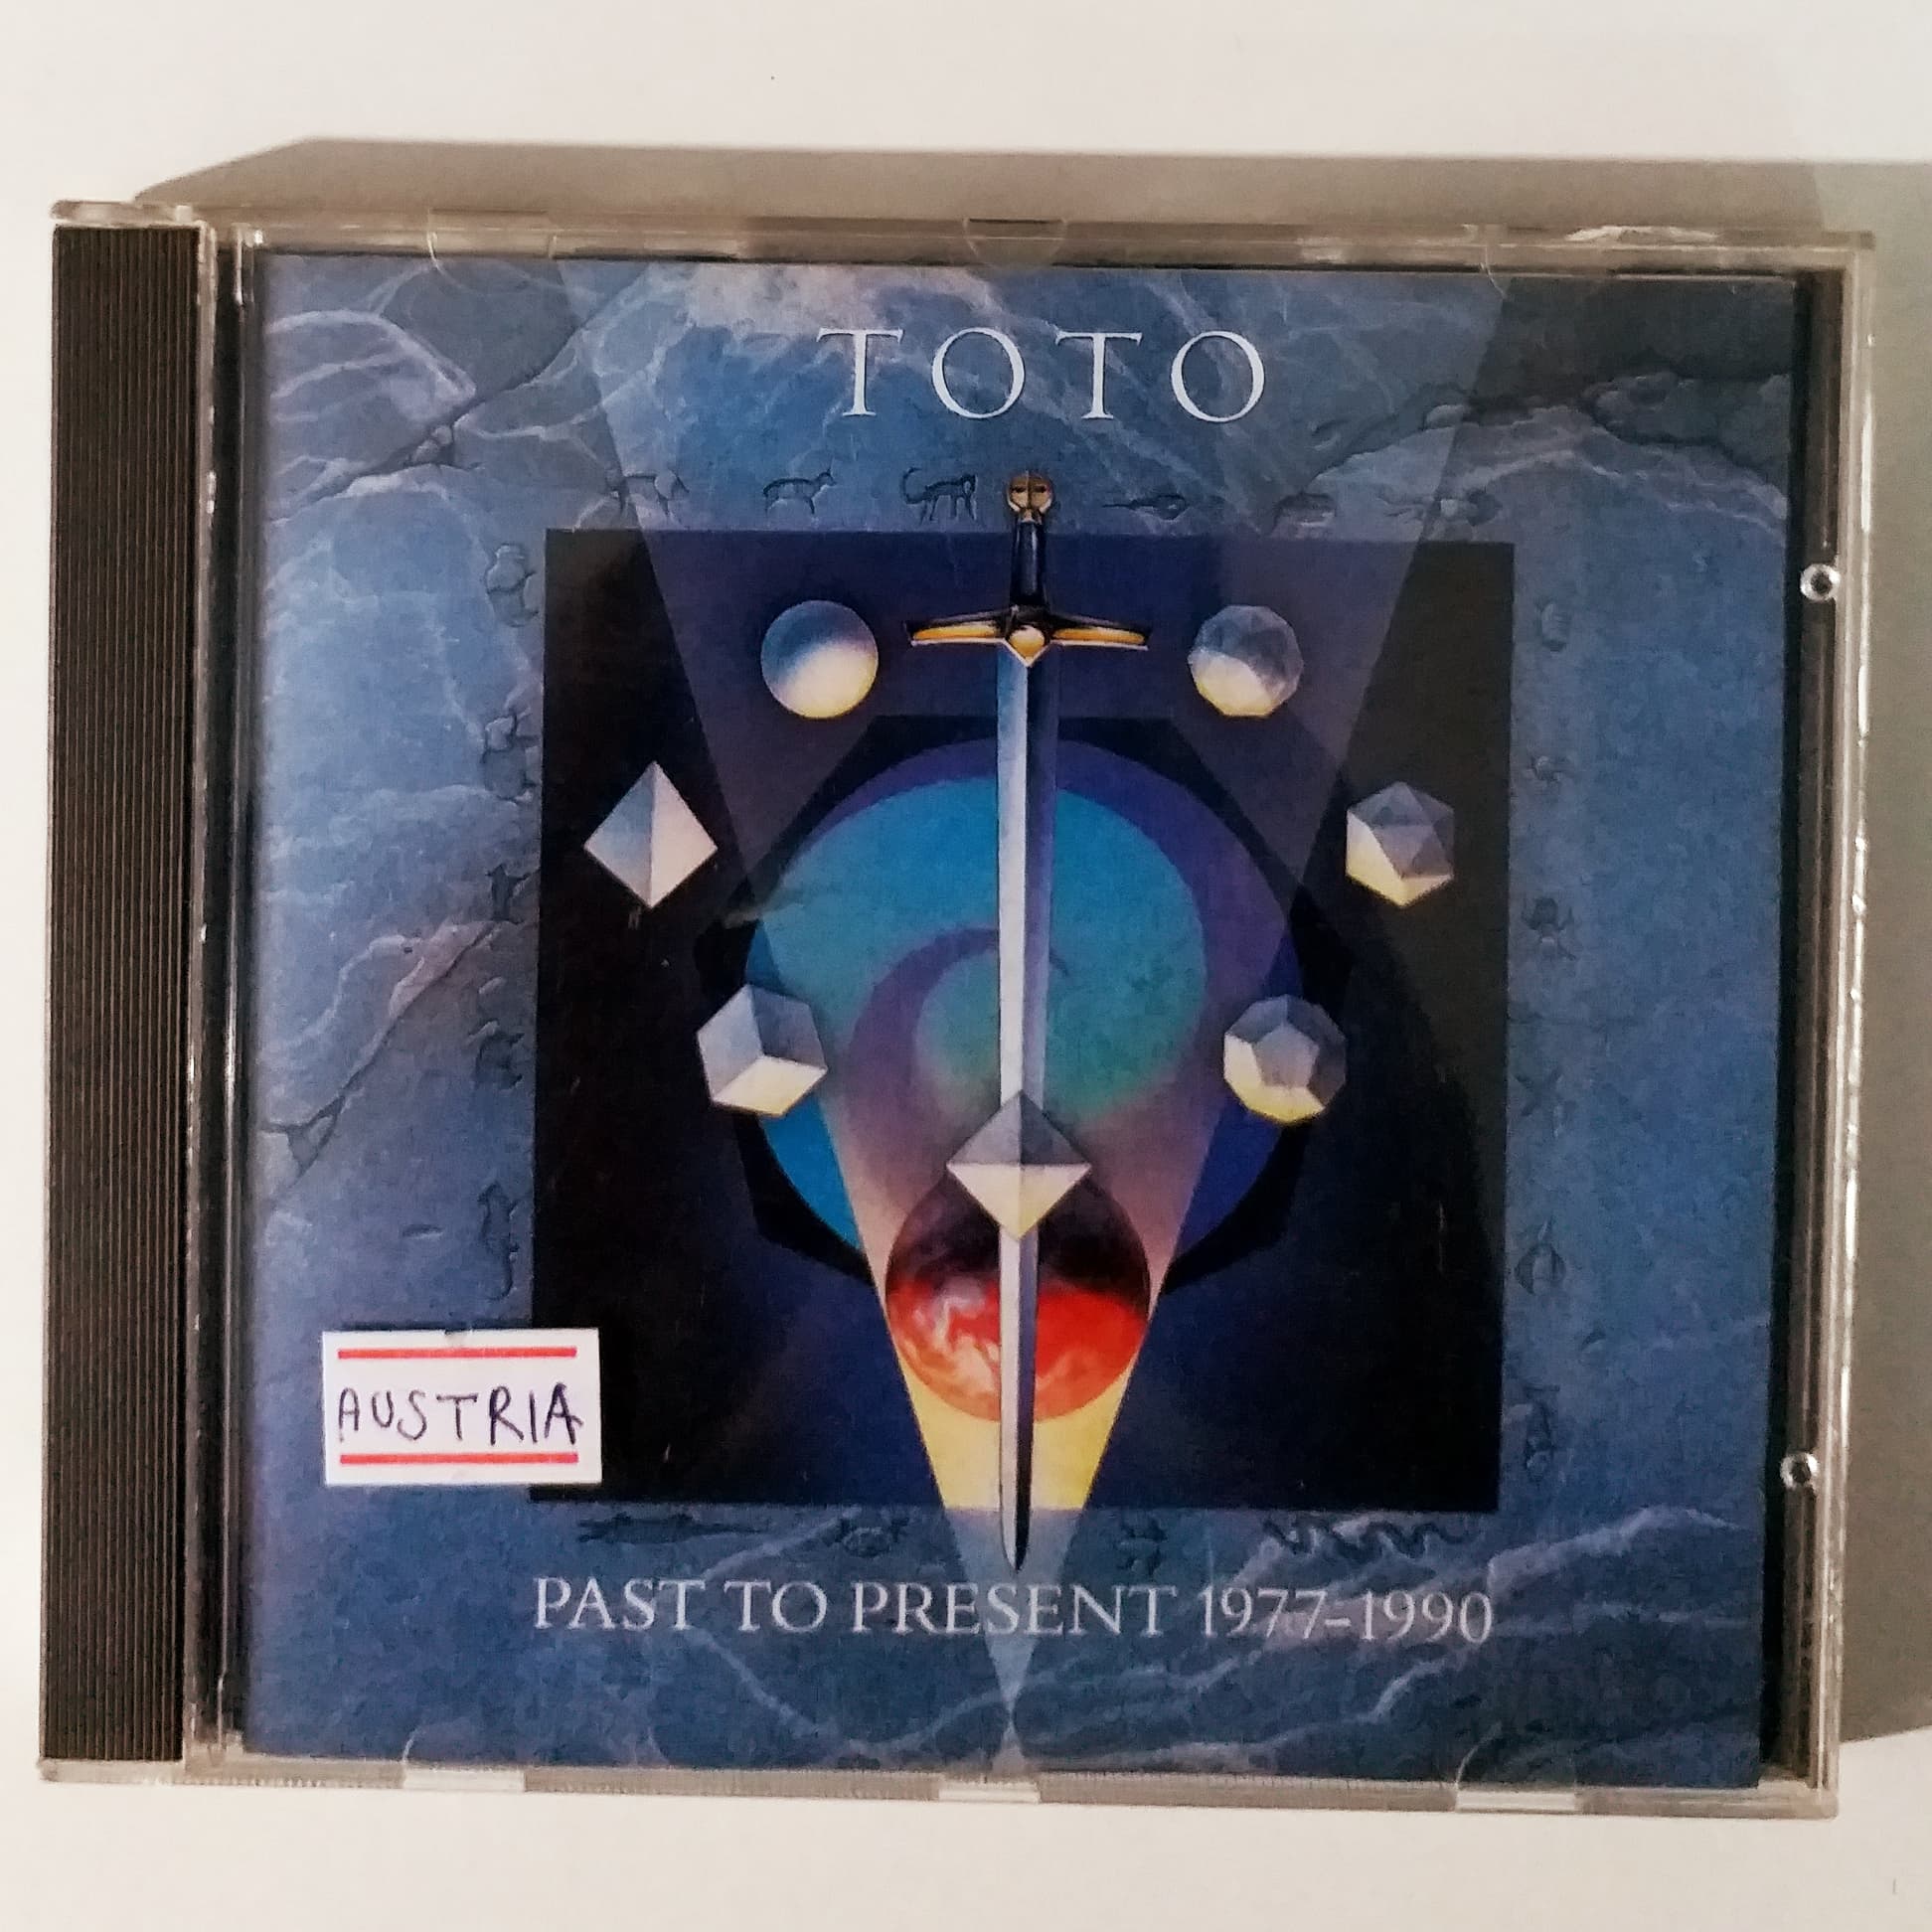 CD TOTO PAST TO PRESENT 1977-1990 MADE IN AUSTRIA